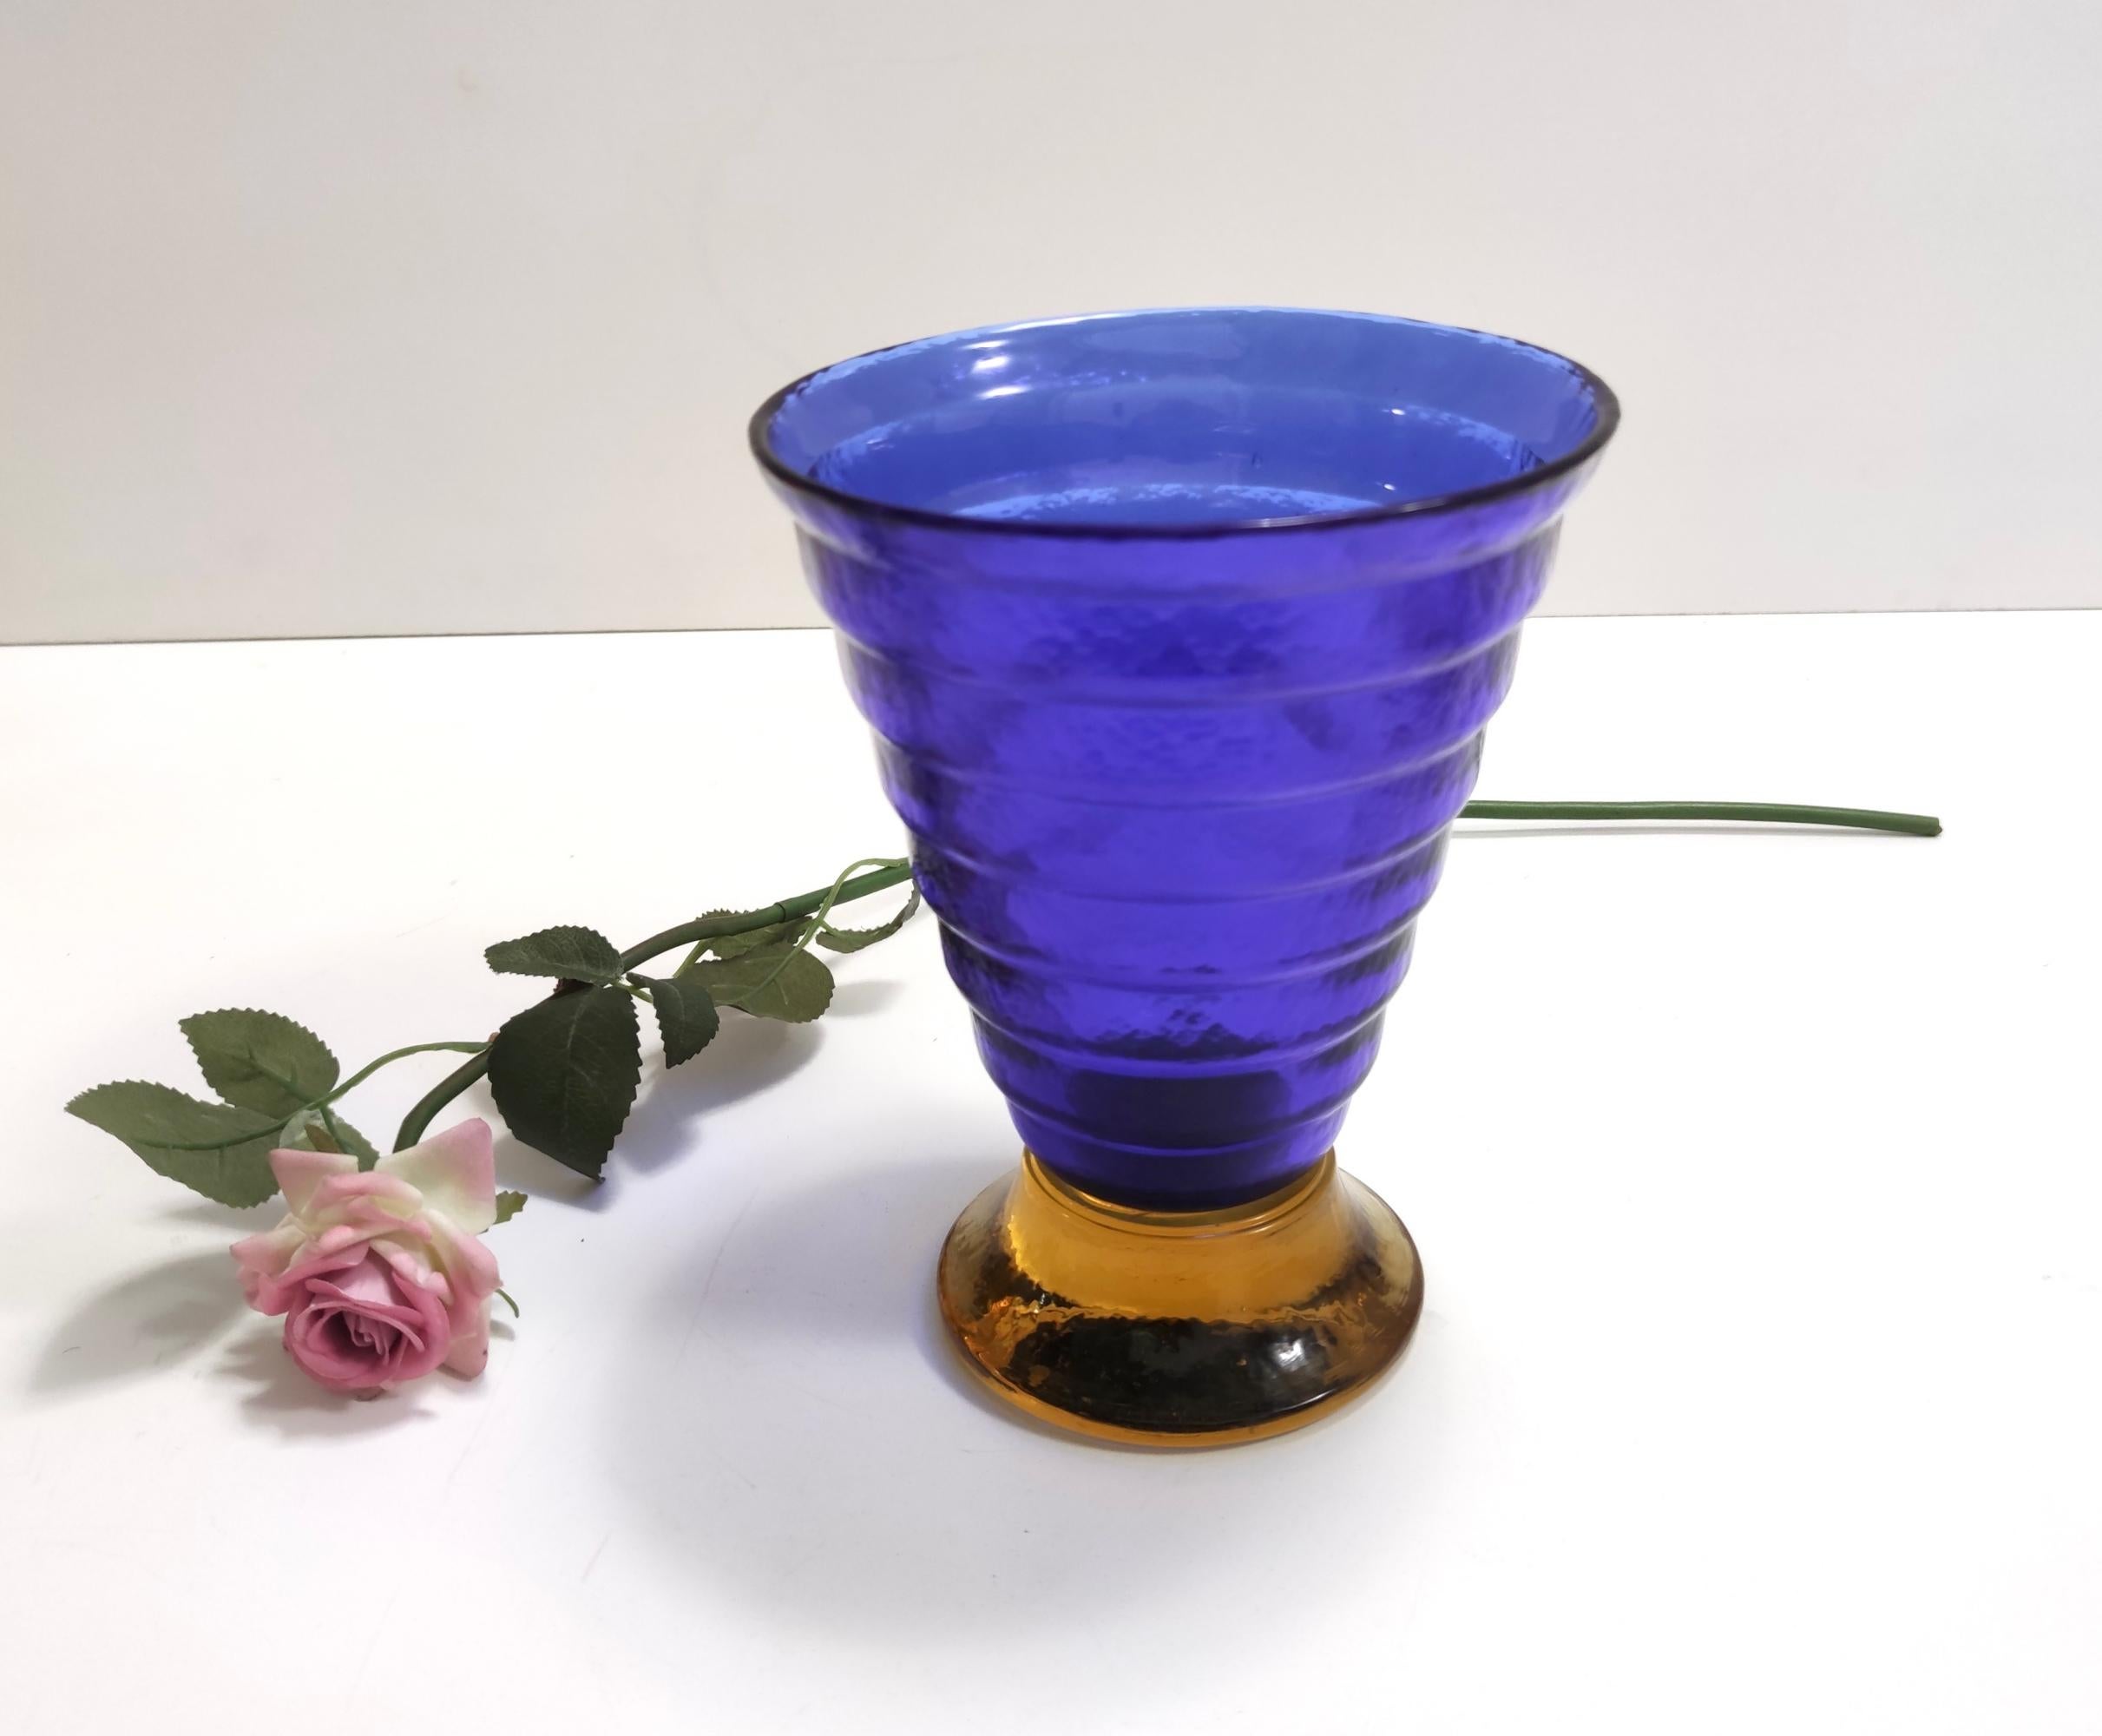 Made in Italy, in Murano, 1970s - 1980s.
This rare and elegant vase is made in blue and yellow Murano glass.
Its style is typical of the 70s - 80s. 
This vase is marked Cá dei Vetrai.
The glass has bubbles and pleasant transparencies due to the